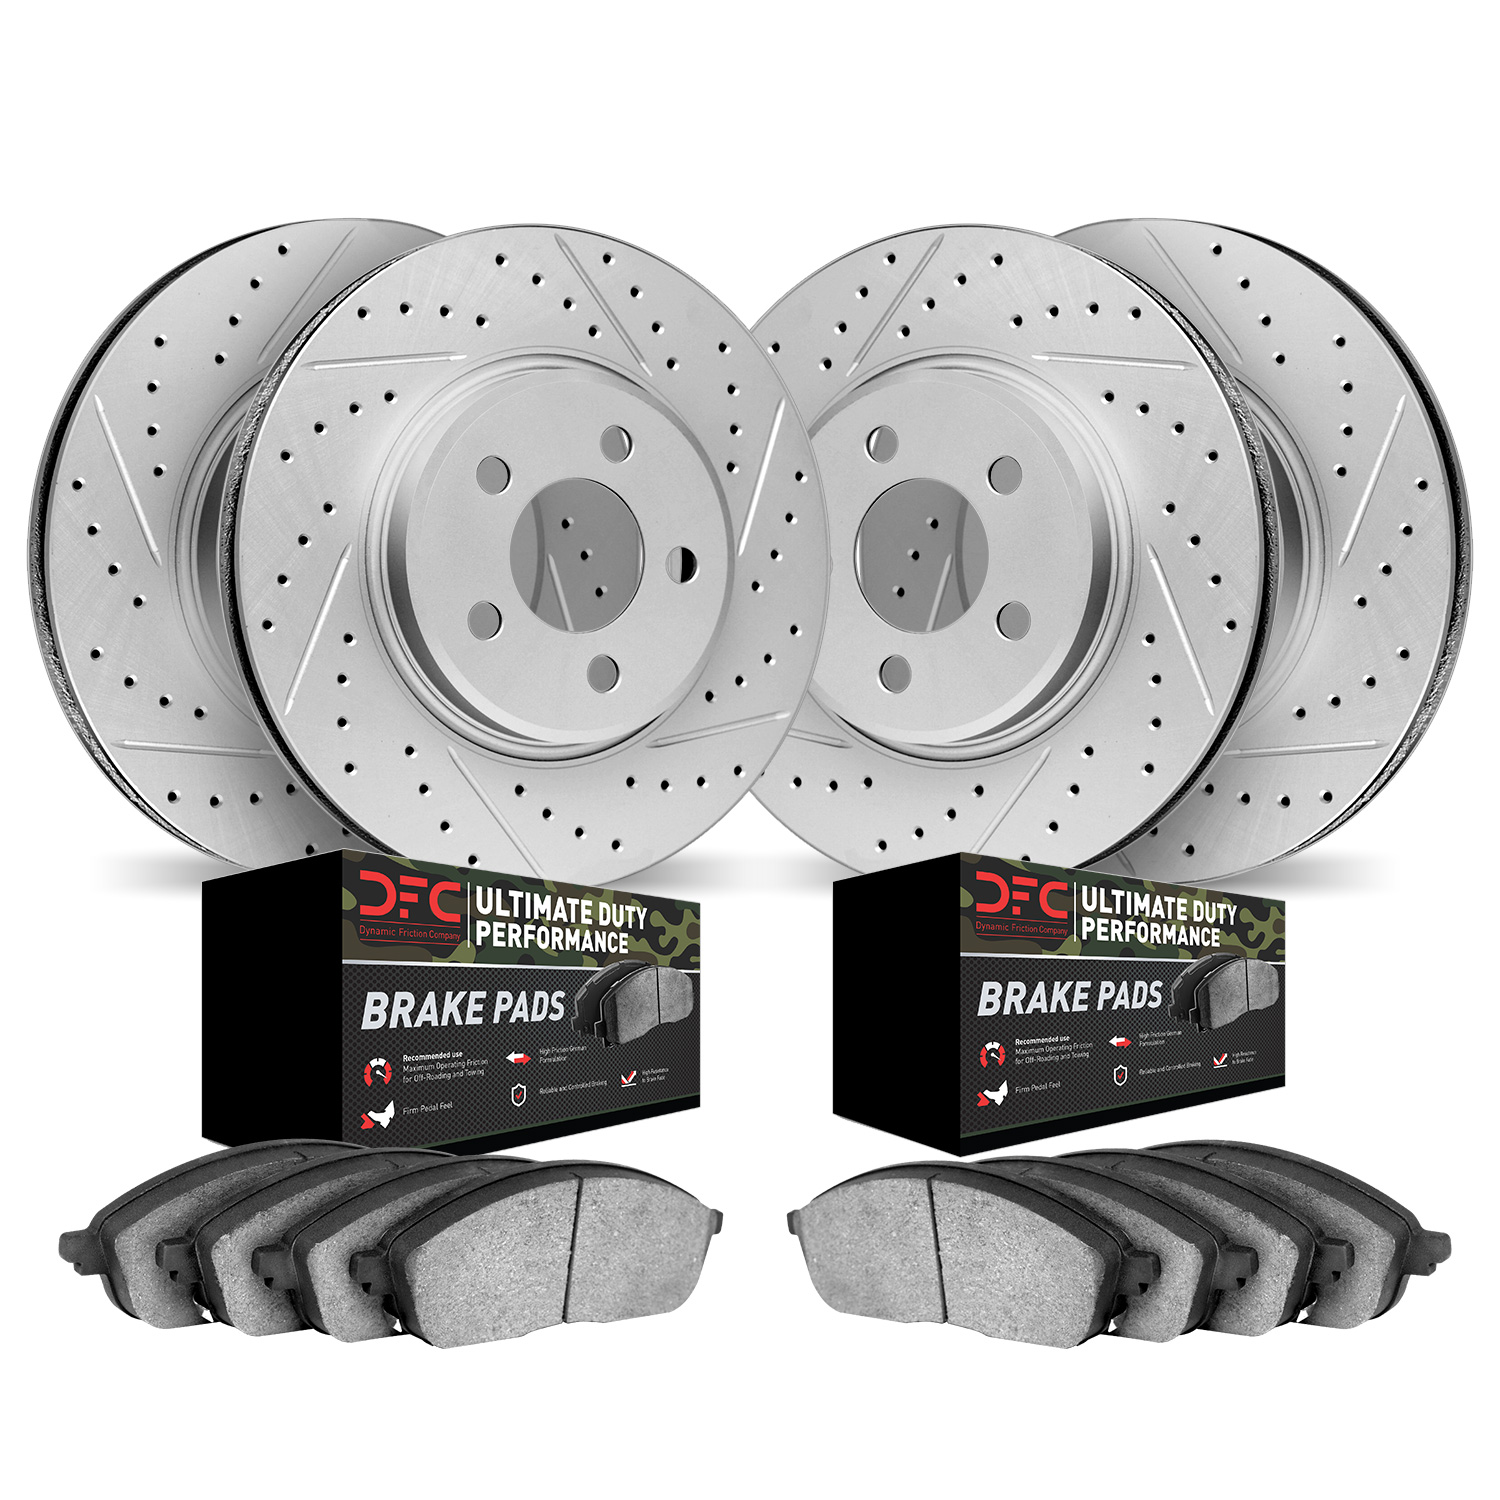 2404-42005 Geoperformance Drilled/Slotted Brake Rotors with Ultimate-Duty Brake Pads Kit, Fits Select Mopar, Position: Front and